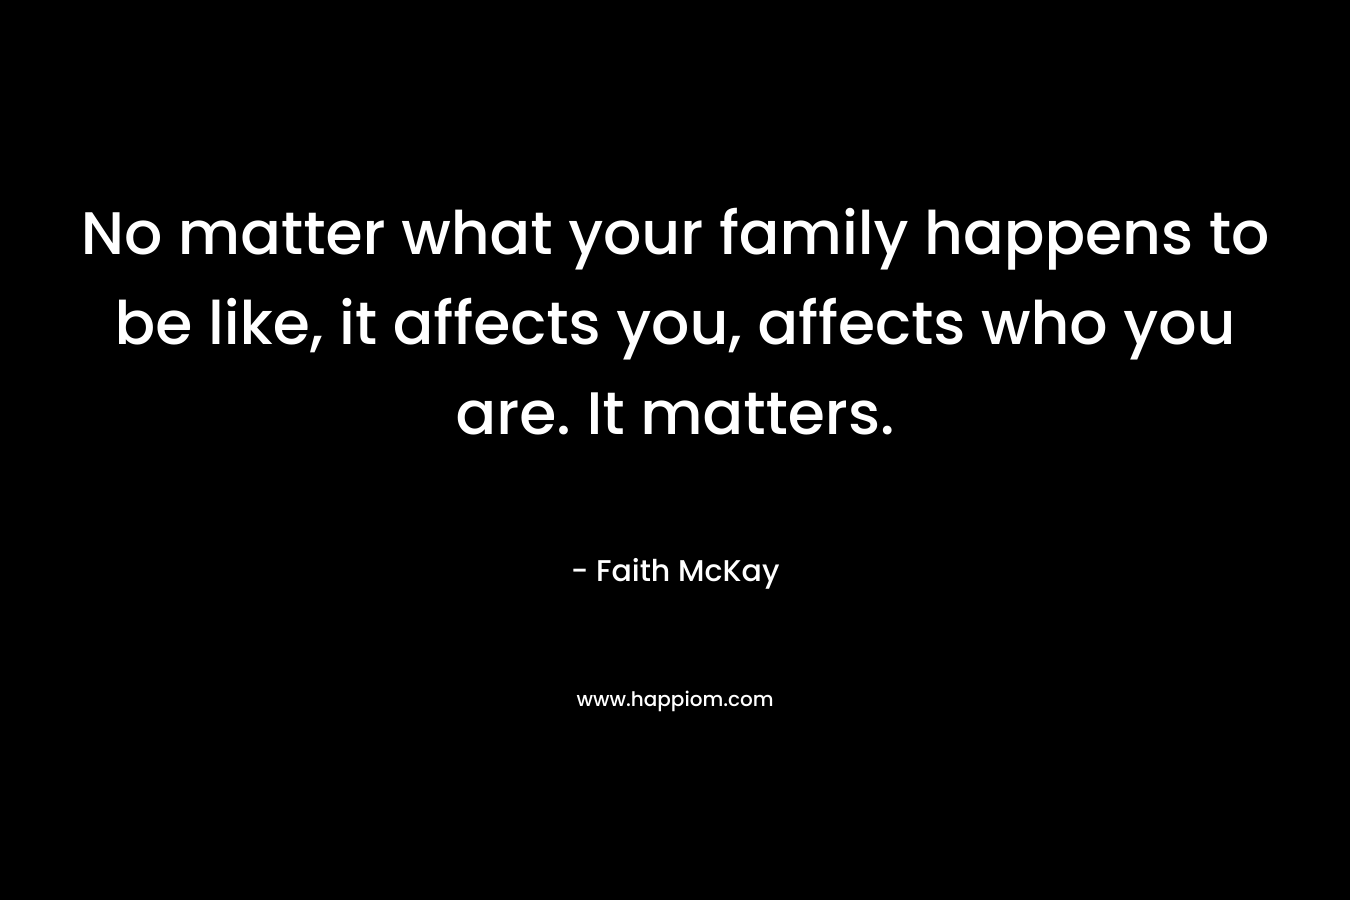 No matter what your family happens to be like, it affects you, affects who you are. It matters. – Faith McKay